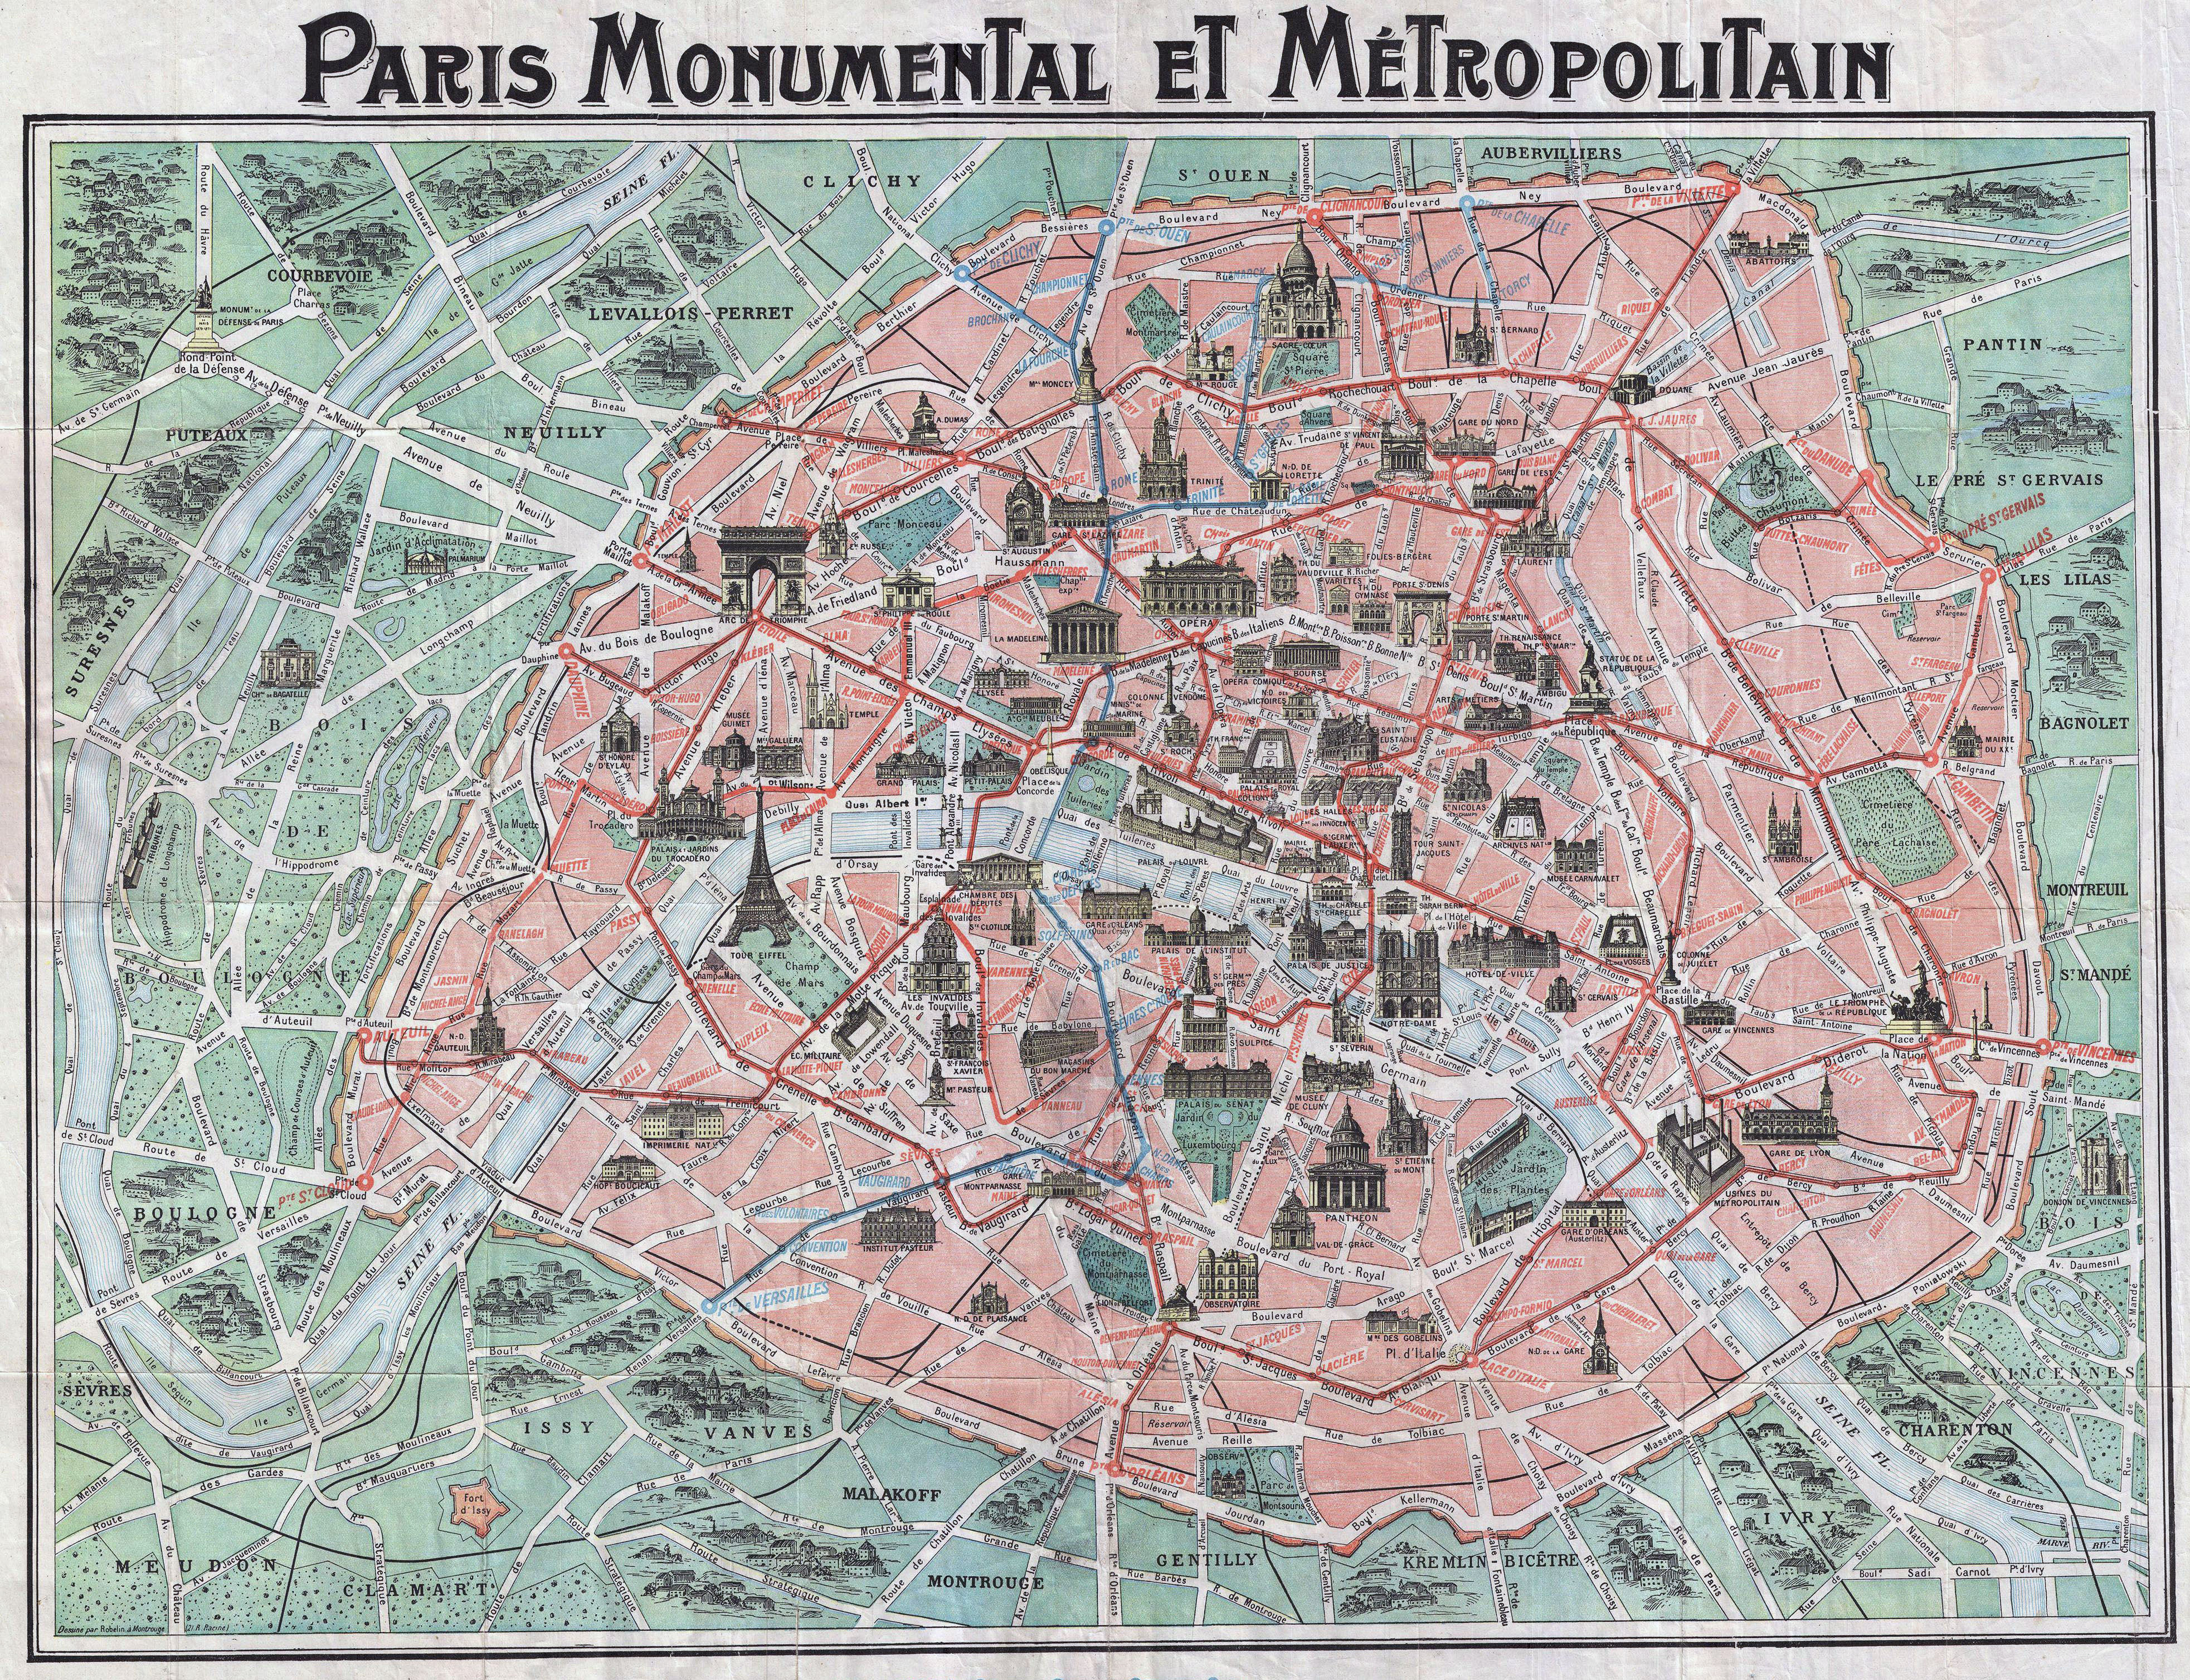 http://www.vidiani.com/maps/maps_of_europe/maps_of_france/paris/large_detailed_old_map_of_paris_city_1932.jpg